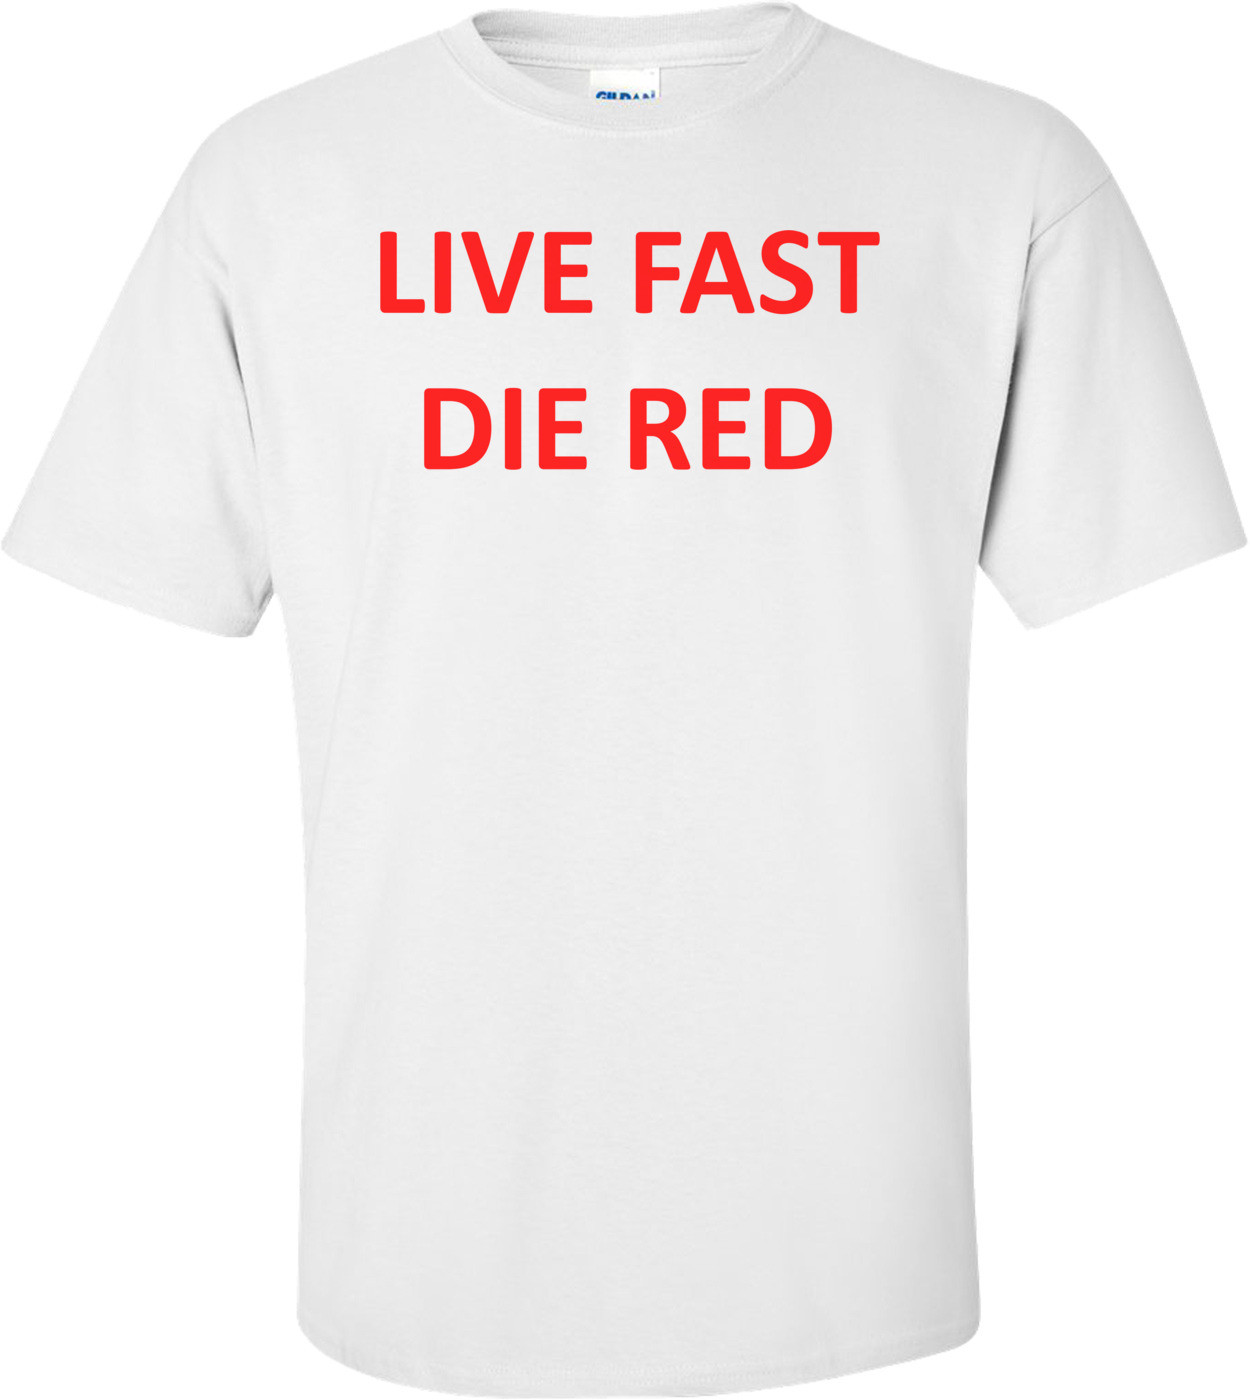 LIVE FAST DIE RED Shirt